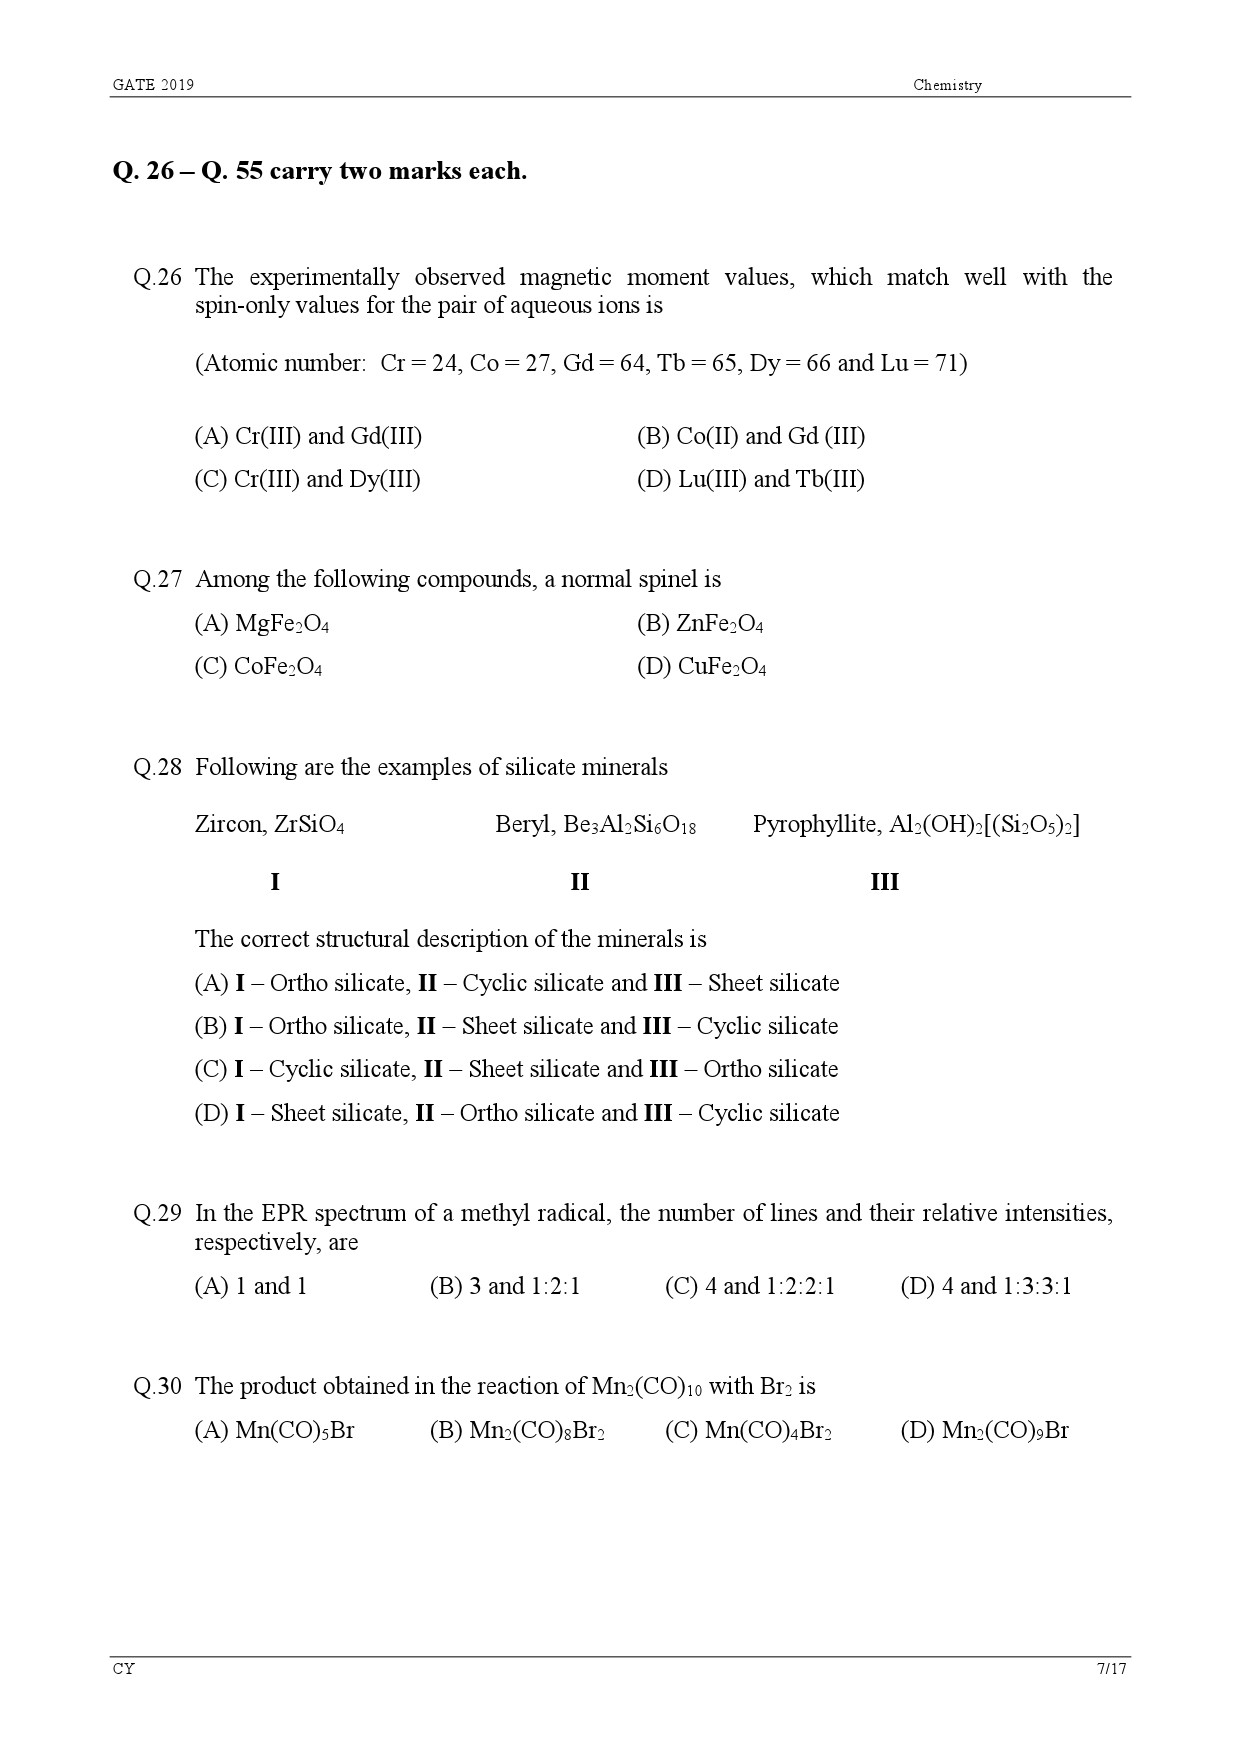 GATE Exam Question Paper 2019 Chemistry 10